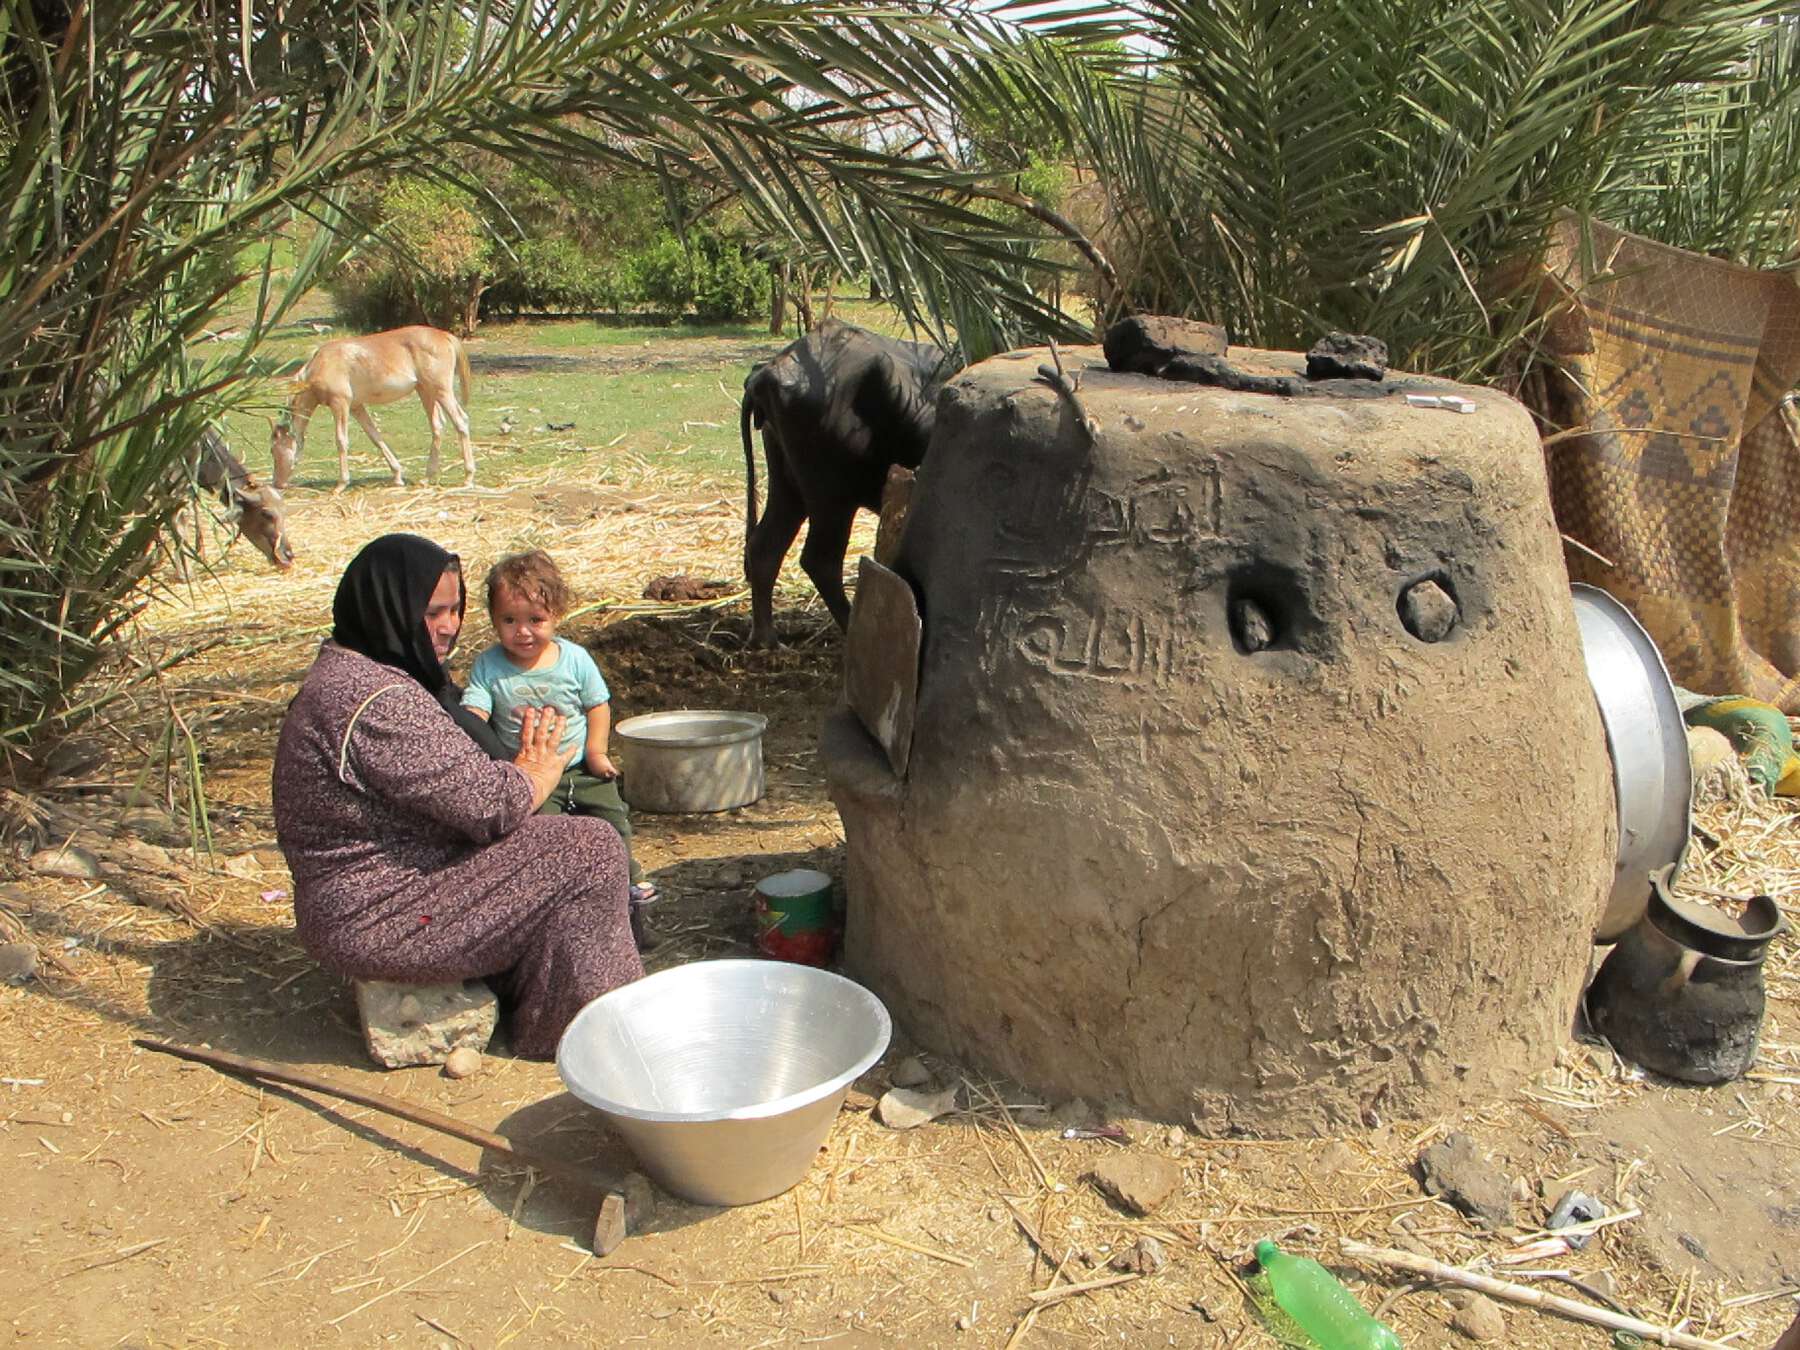 Woman sitting with child on her lap in front of a mud baking oven in a large field with trees and cattle grazing in the back.